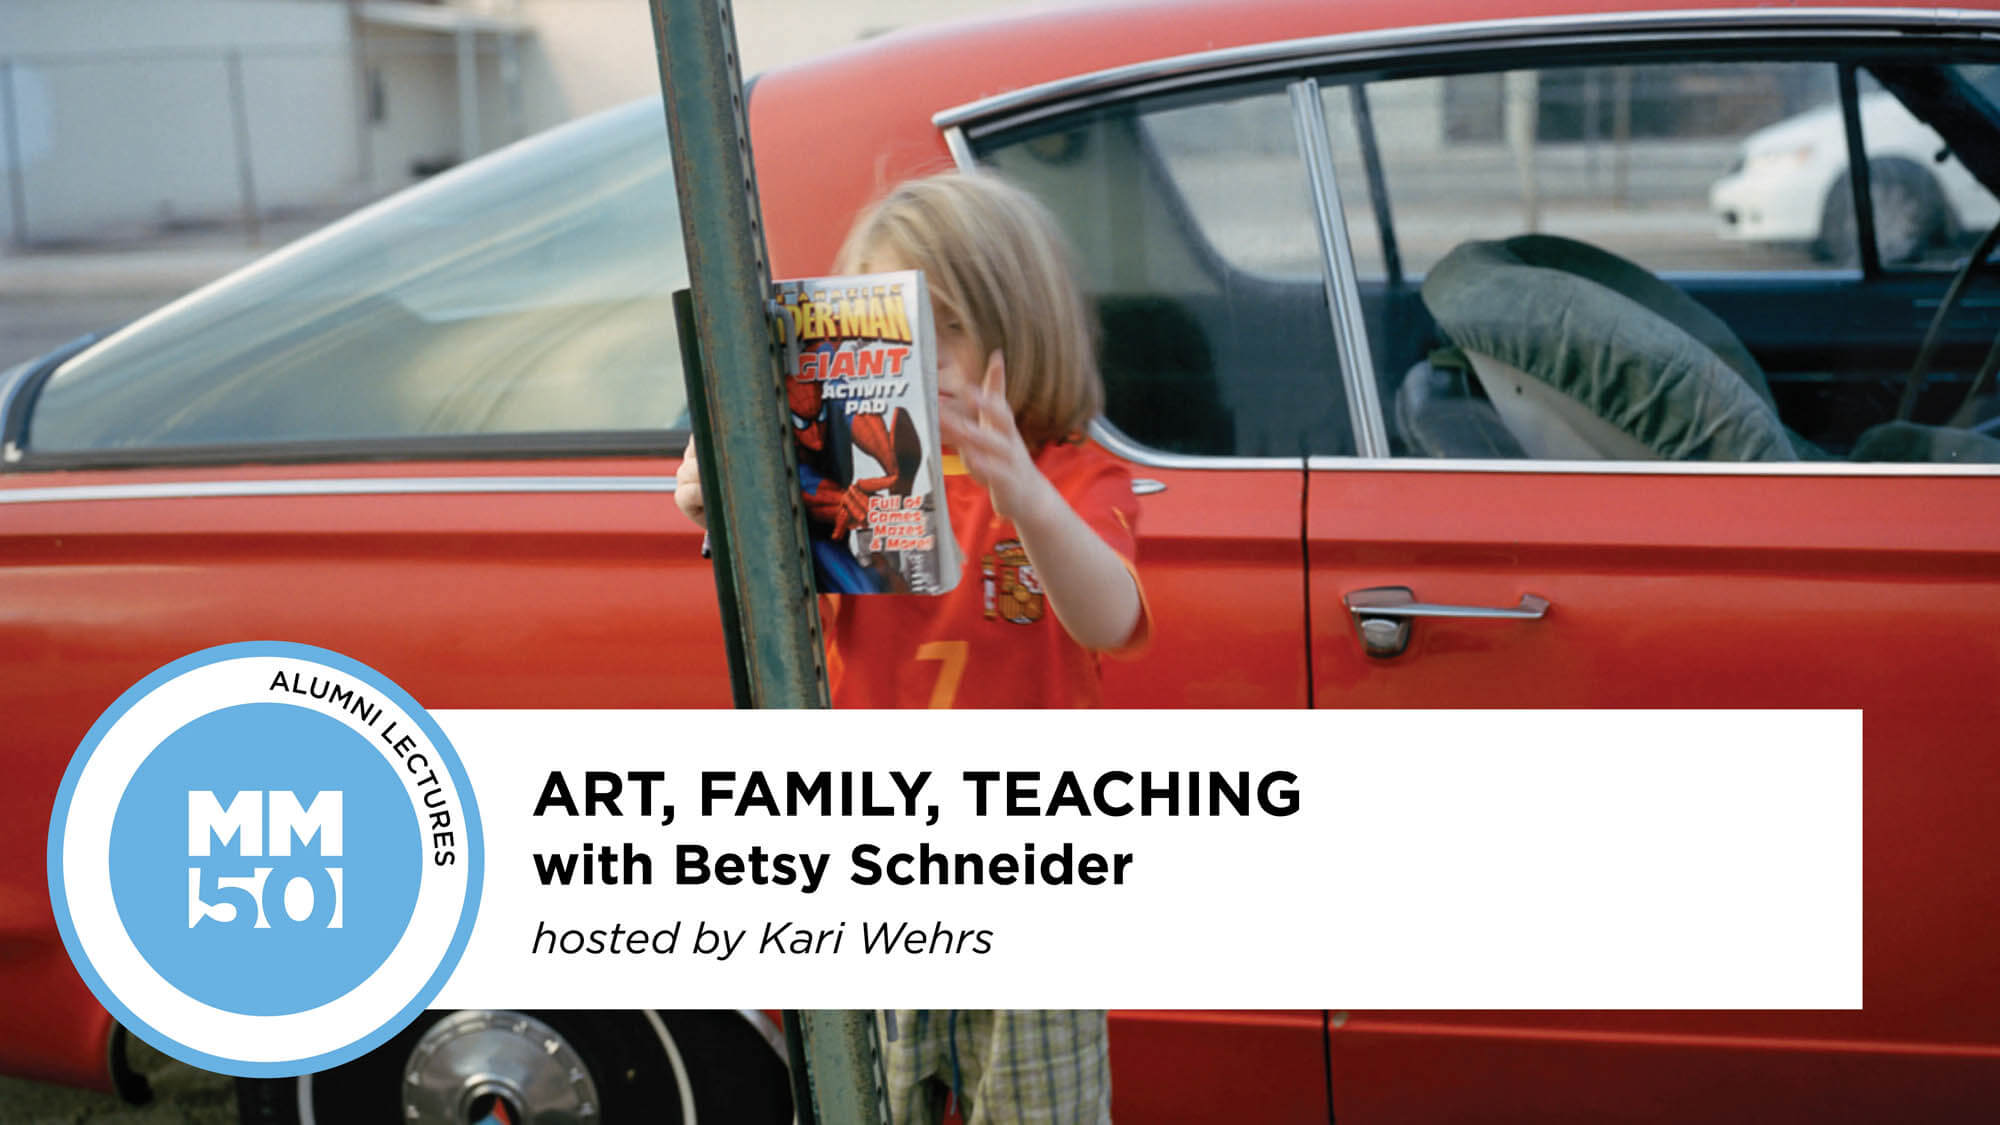 Maine Media Alumni Lecture: ART, FAMILY, TEACHING with Betsy Schneider (banner)